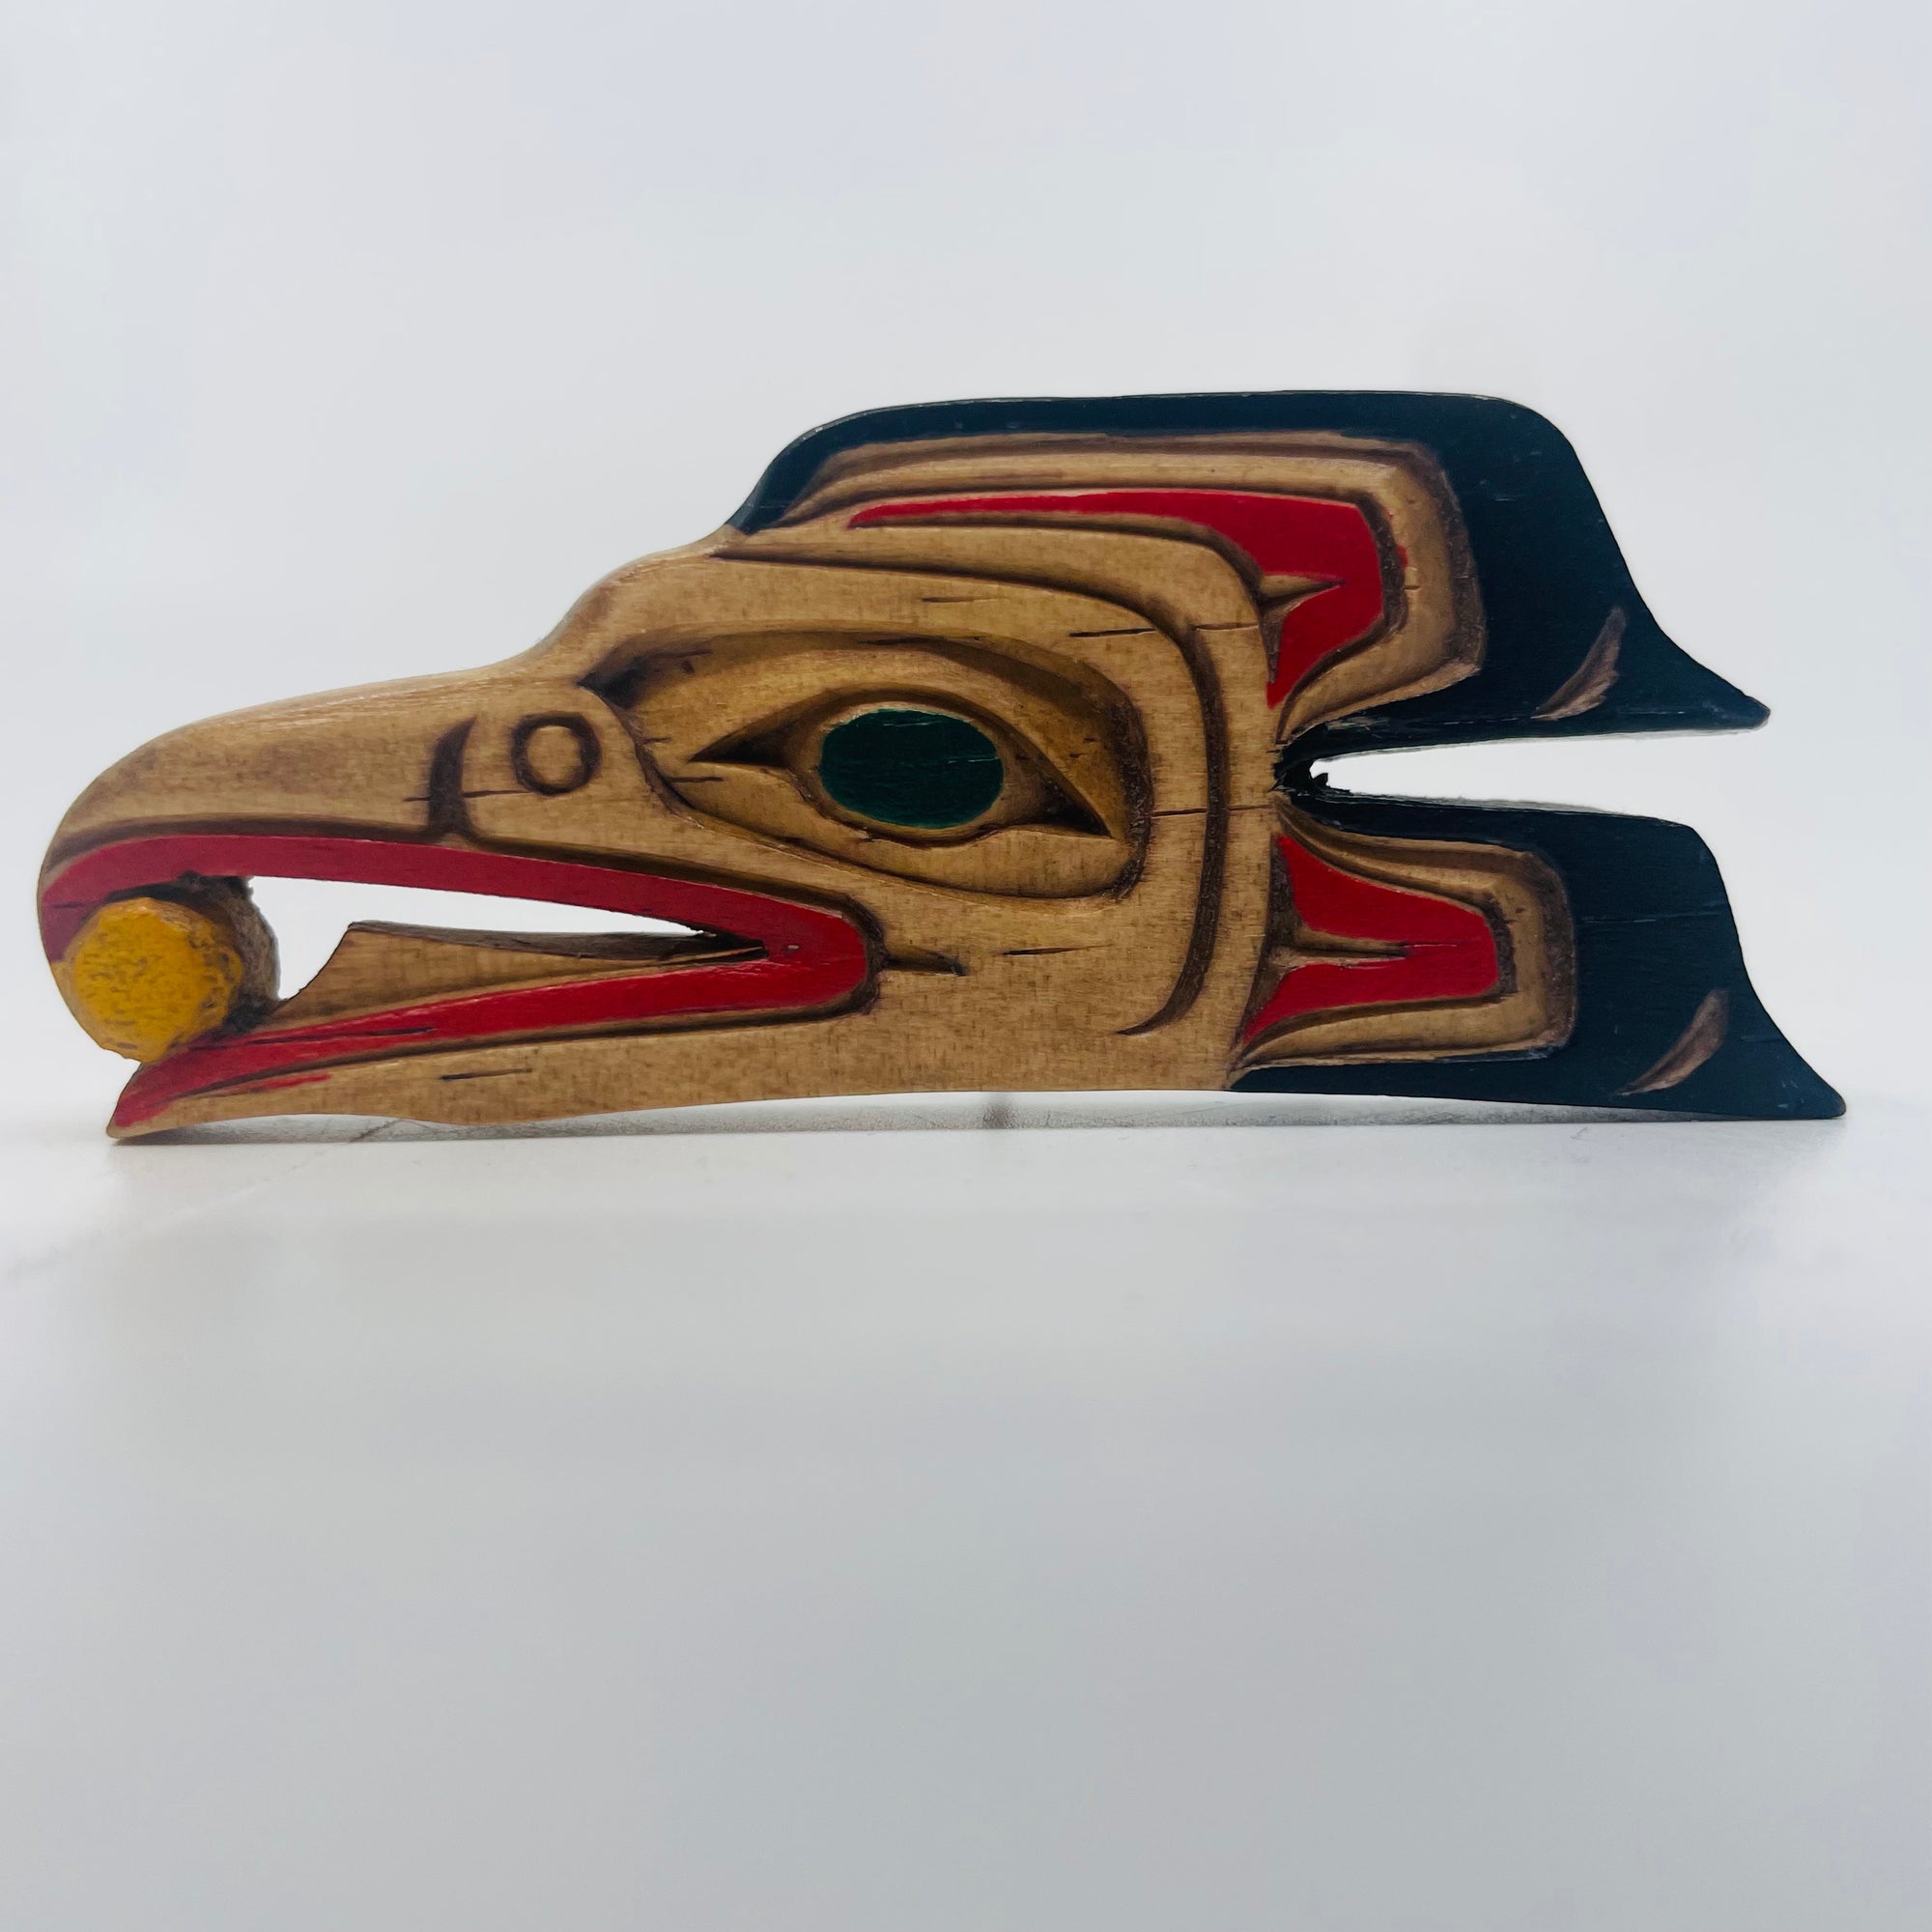 Artie George Magnets - Raven V3 - WM-Magnets-27 - House of Himwitsa Native Art Gallery and Gifts